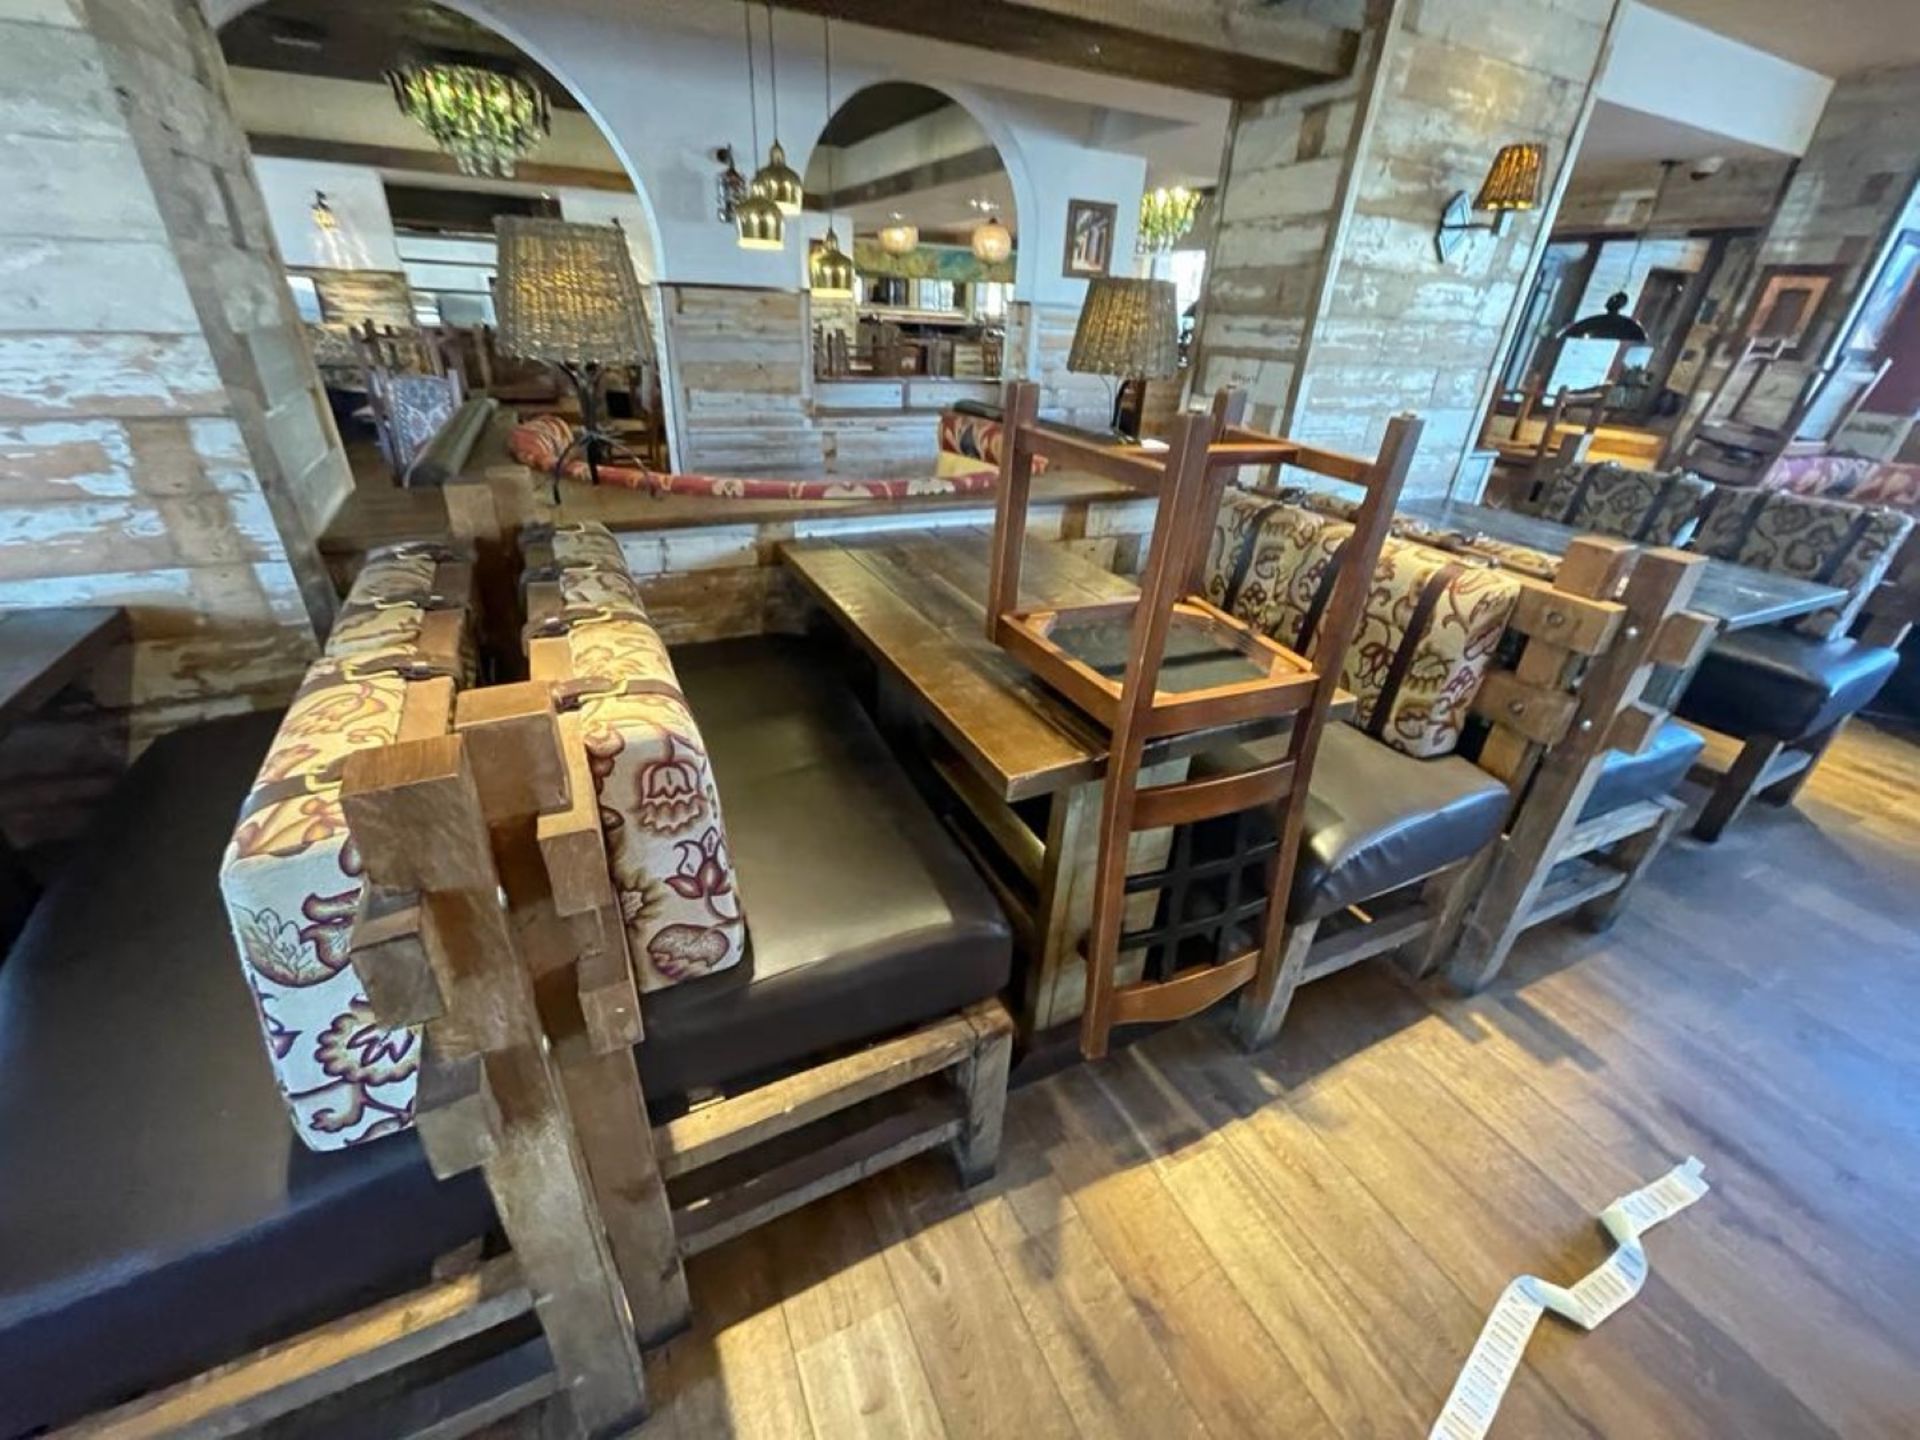 2 x Handcrafted Solid Wood Seating Benches With a Rustic Farmhouse Dining Table - Features Brown - Image 2 of 13